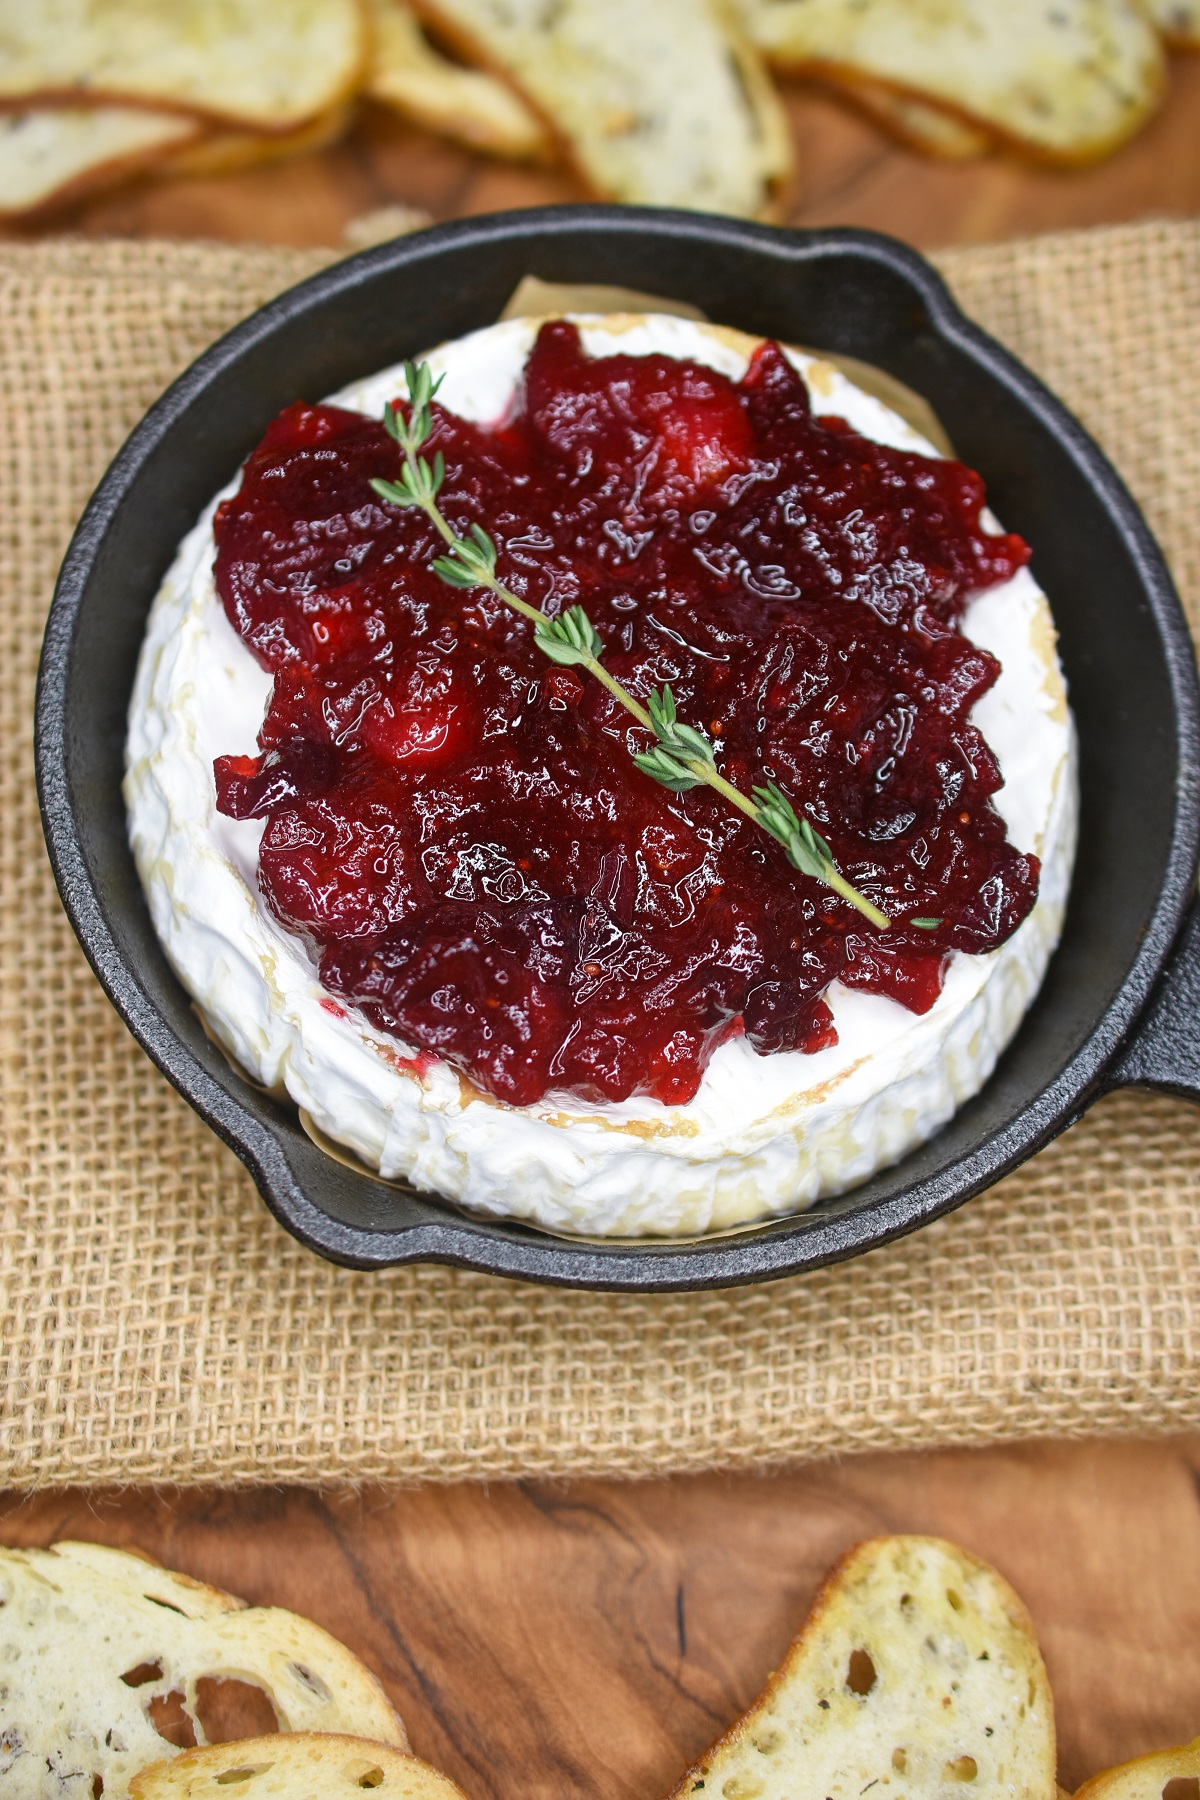 Homemade Cranberry Jam on a Baked Brie is an amazing Thanksgiving recipe or Christmas recipe!